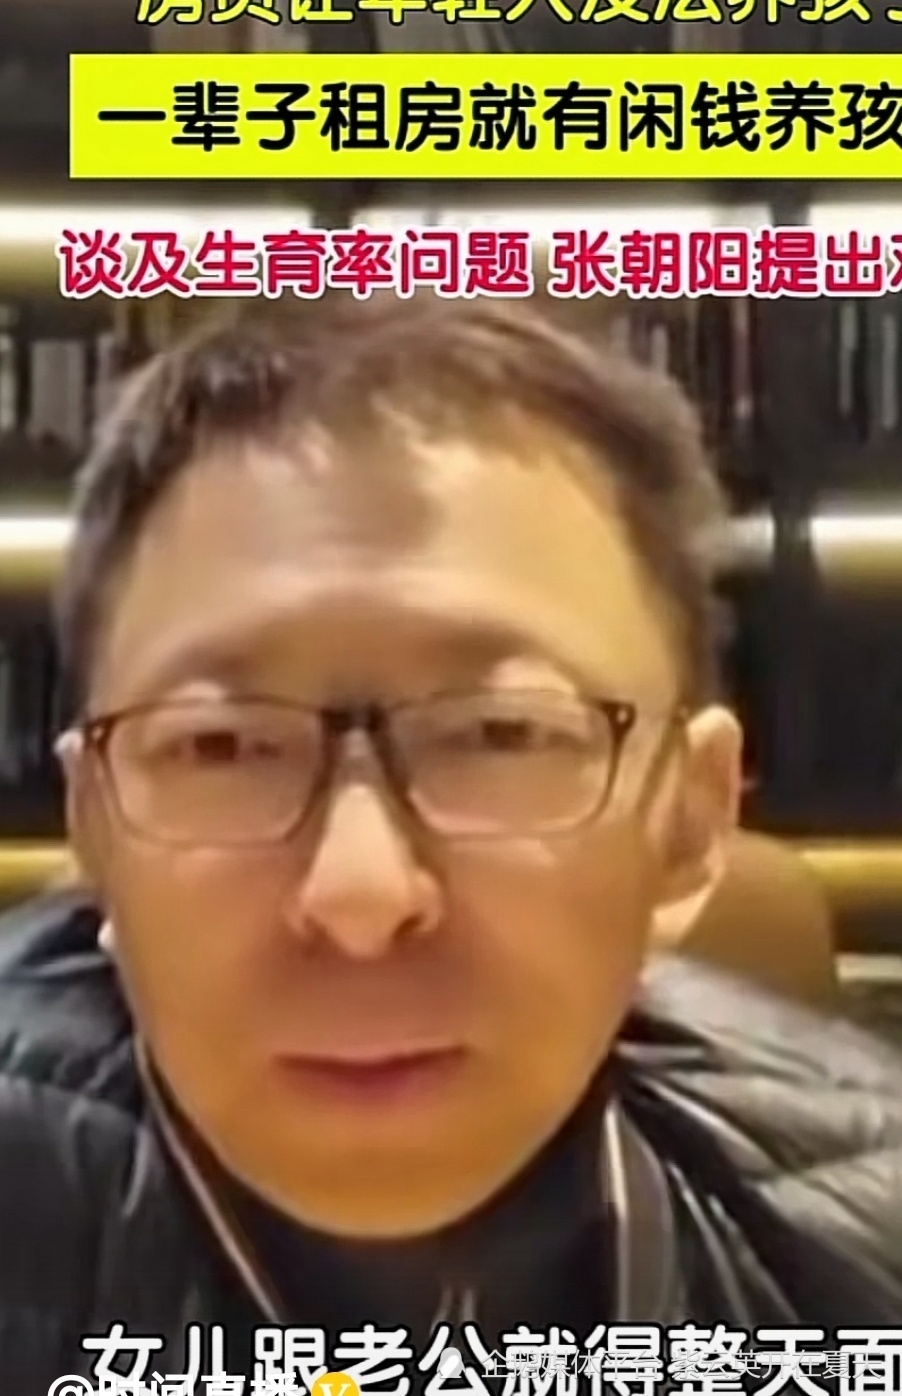 Celebrity Zhang Chaoyang advised young children to live, but it is really painstaking